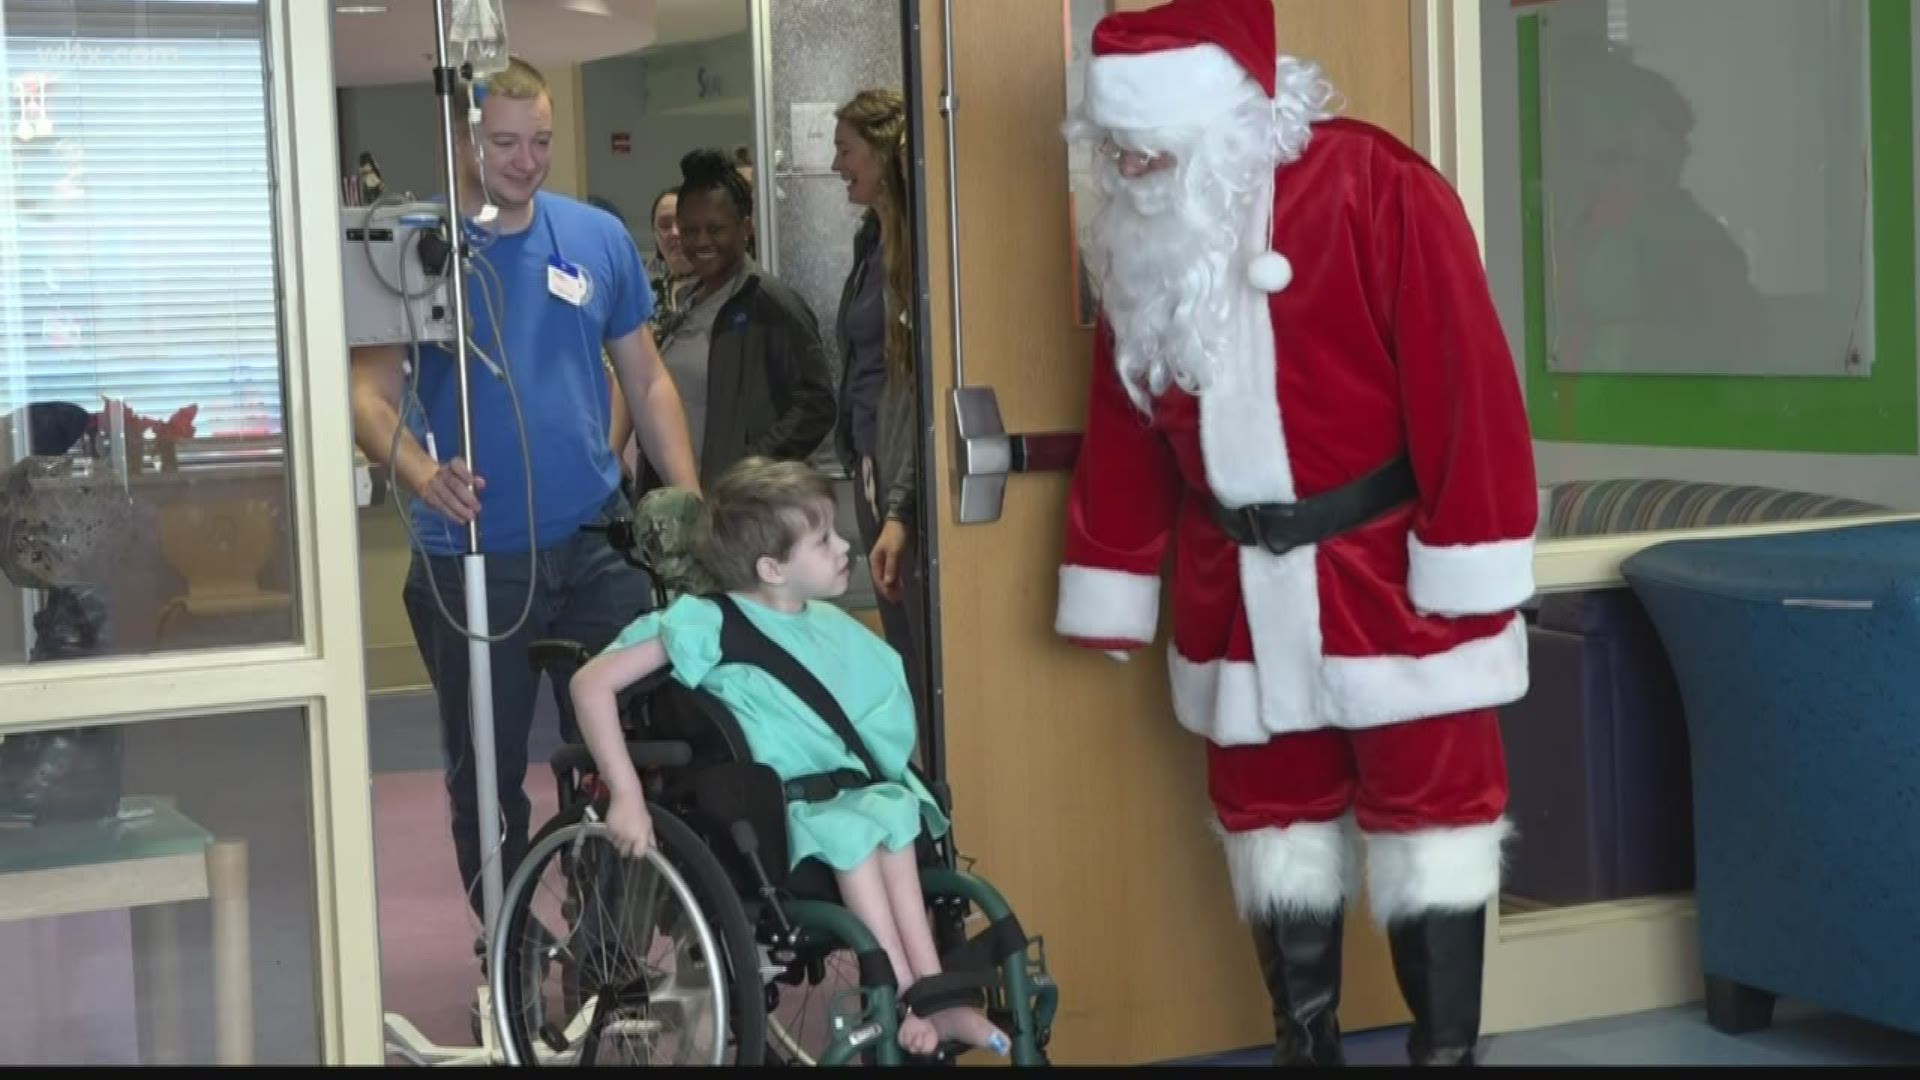 Operation Santa gives the kids at Prisma Health Children's Hospital the chance to get Christmas presents for their loved ones.